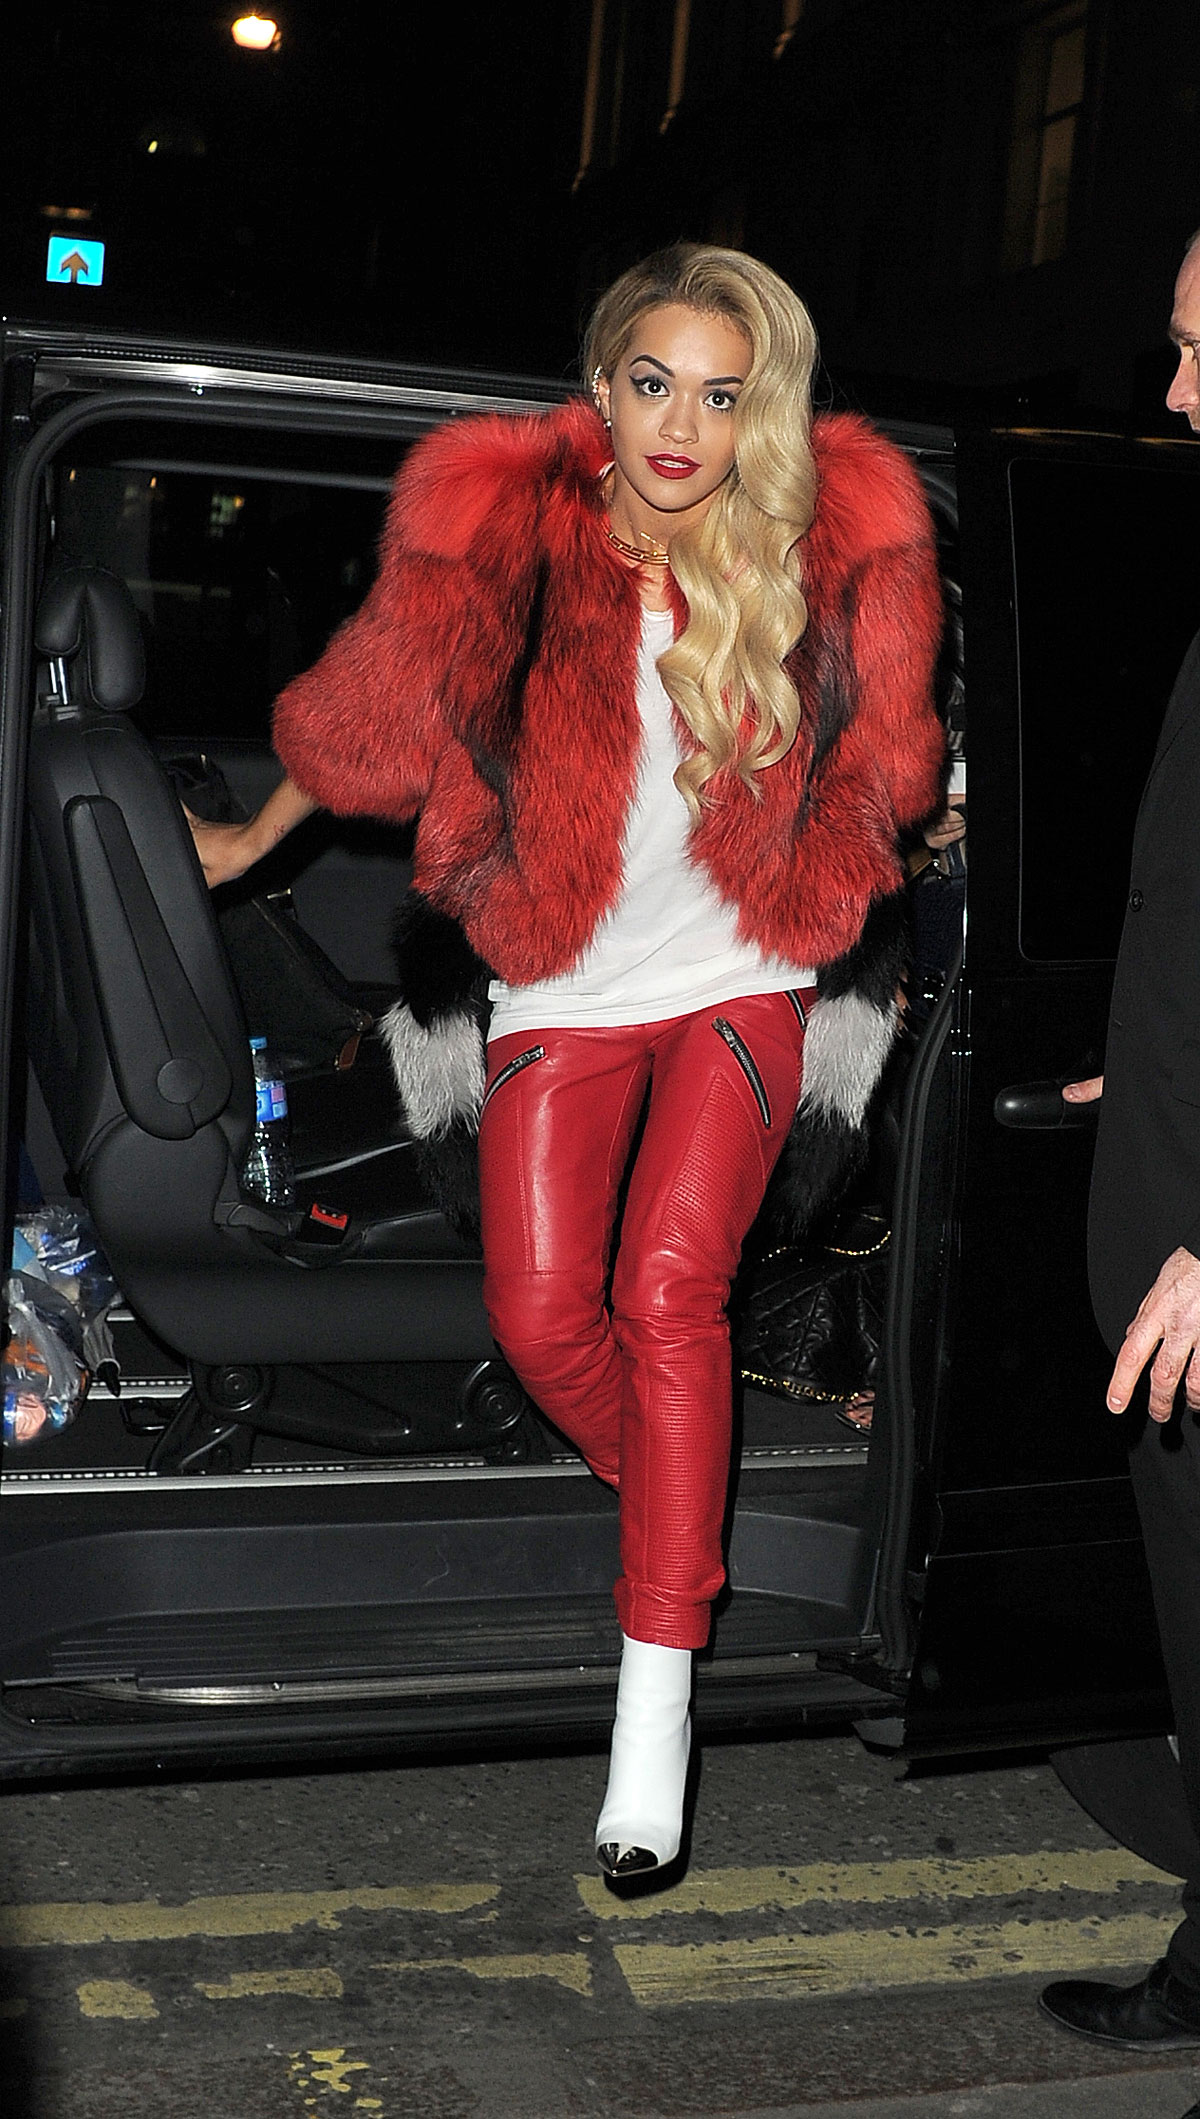 Rita Ora heads out to the Topshop party